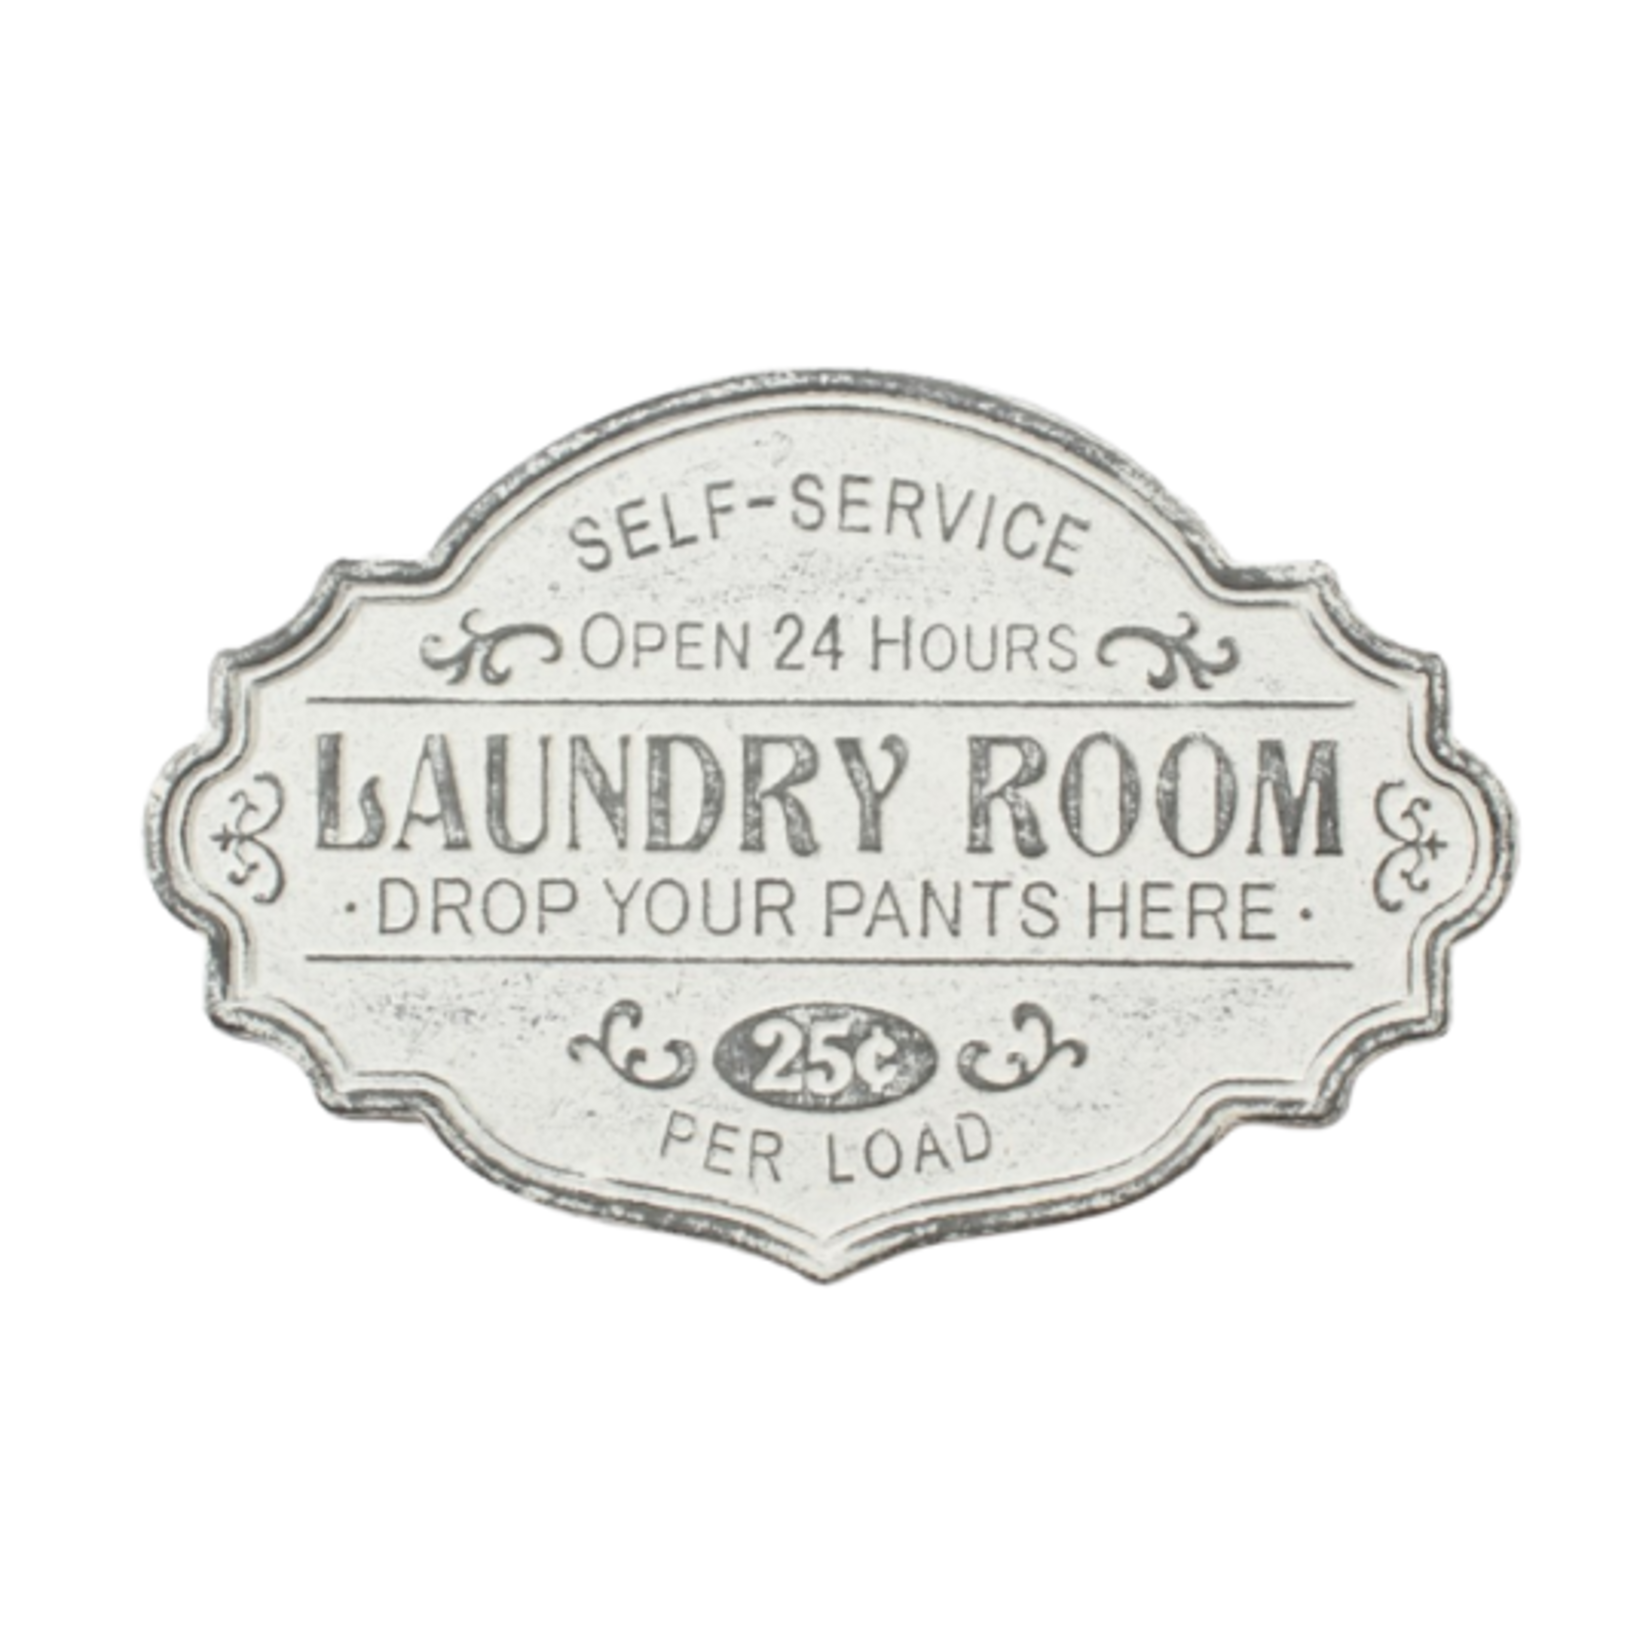 Laundry Room Metal Wall Plaque